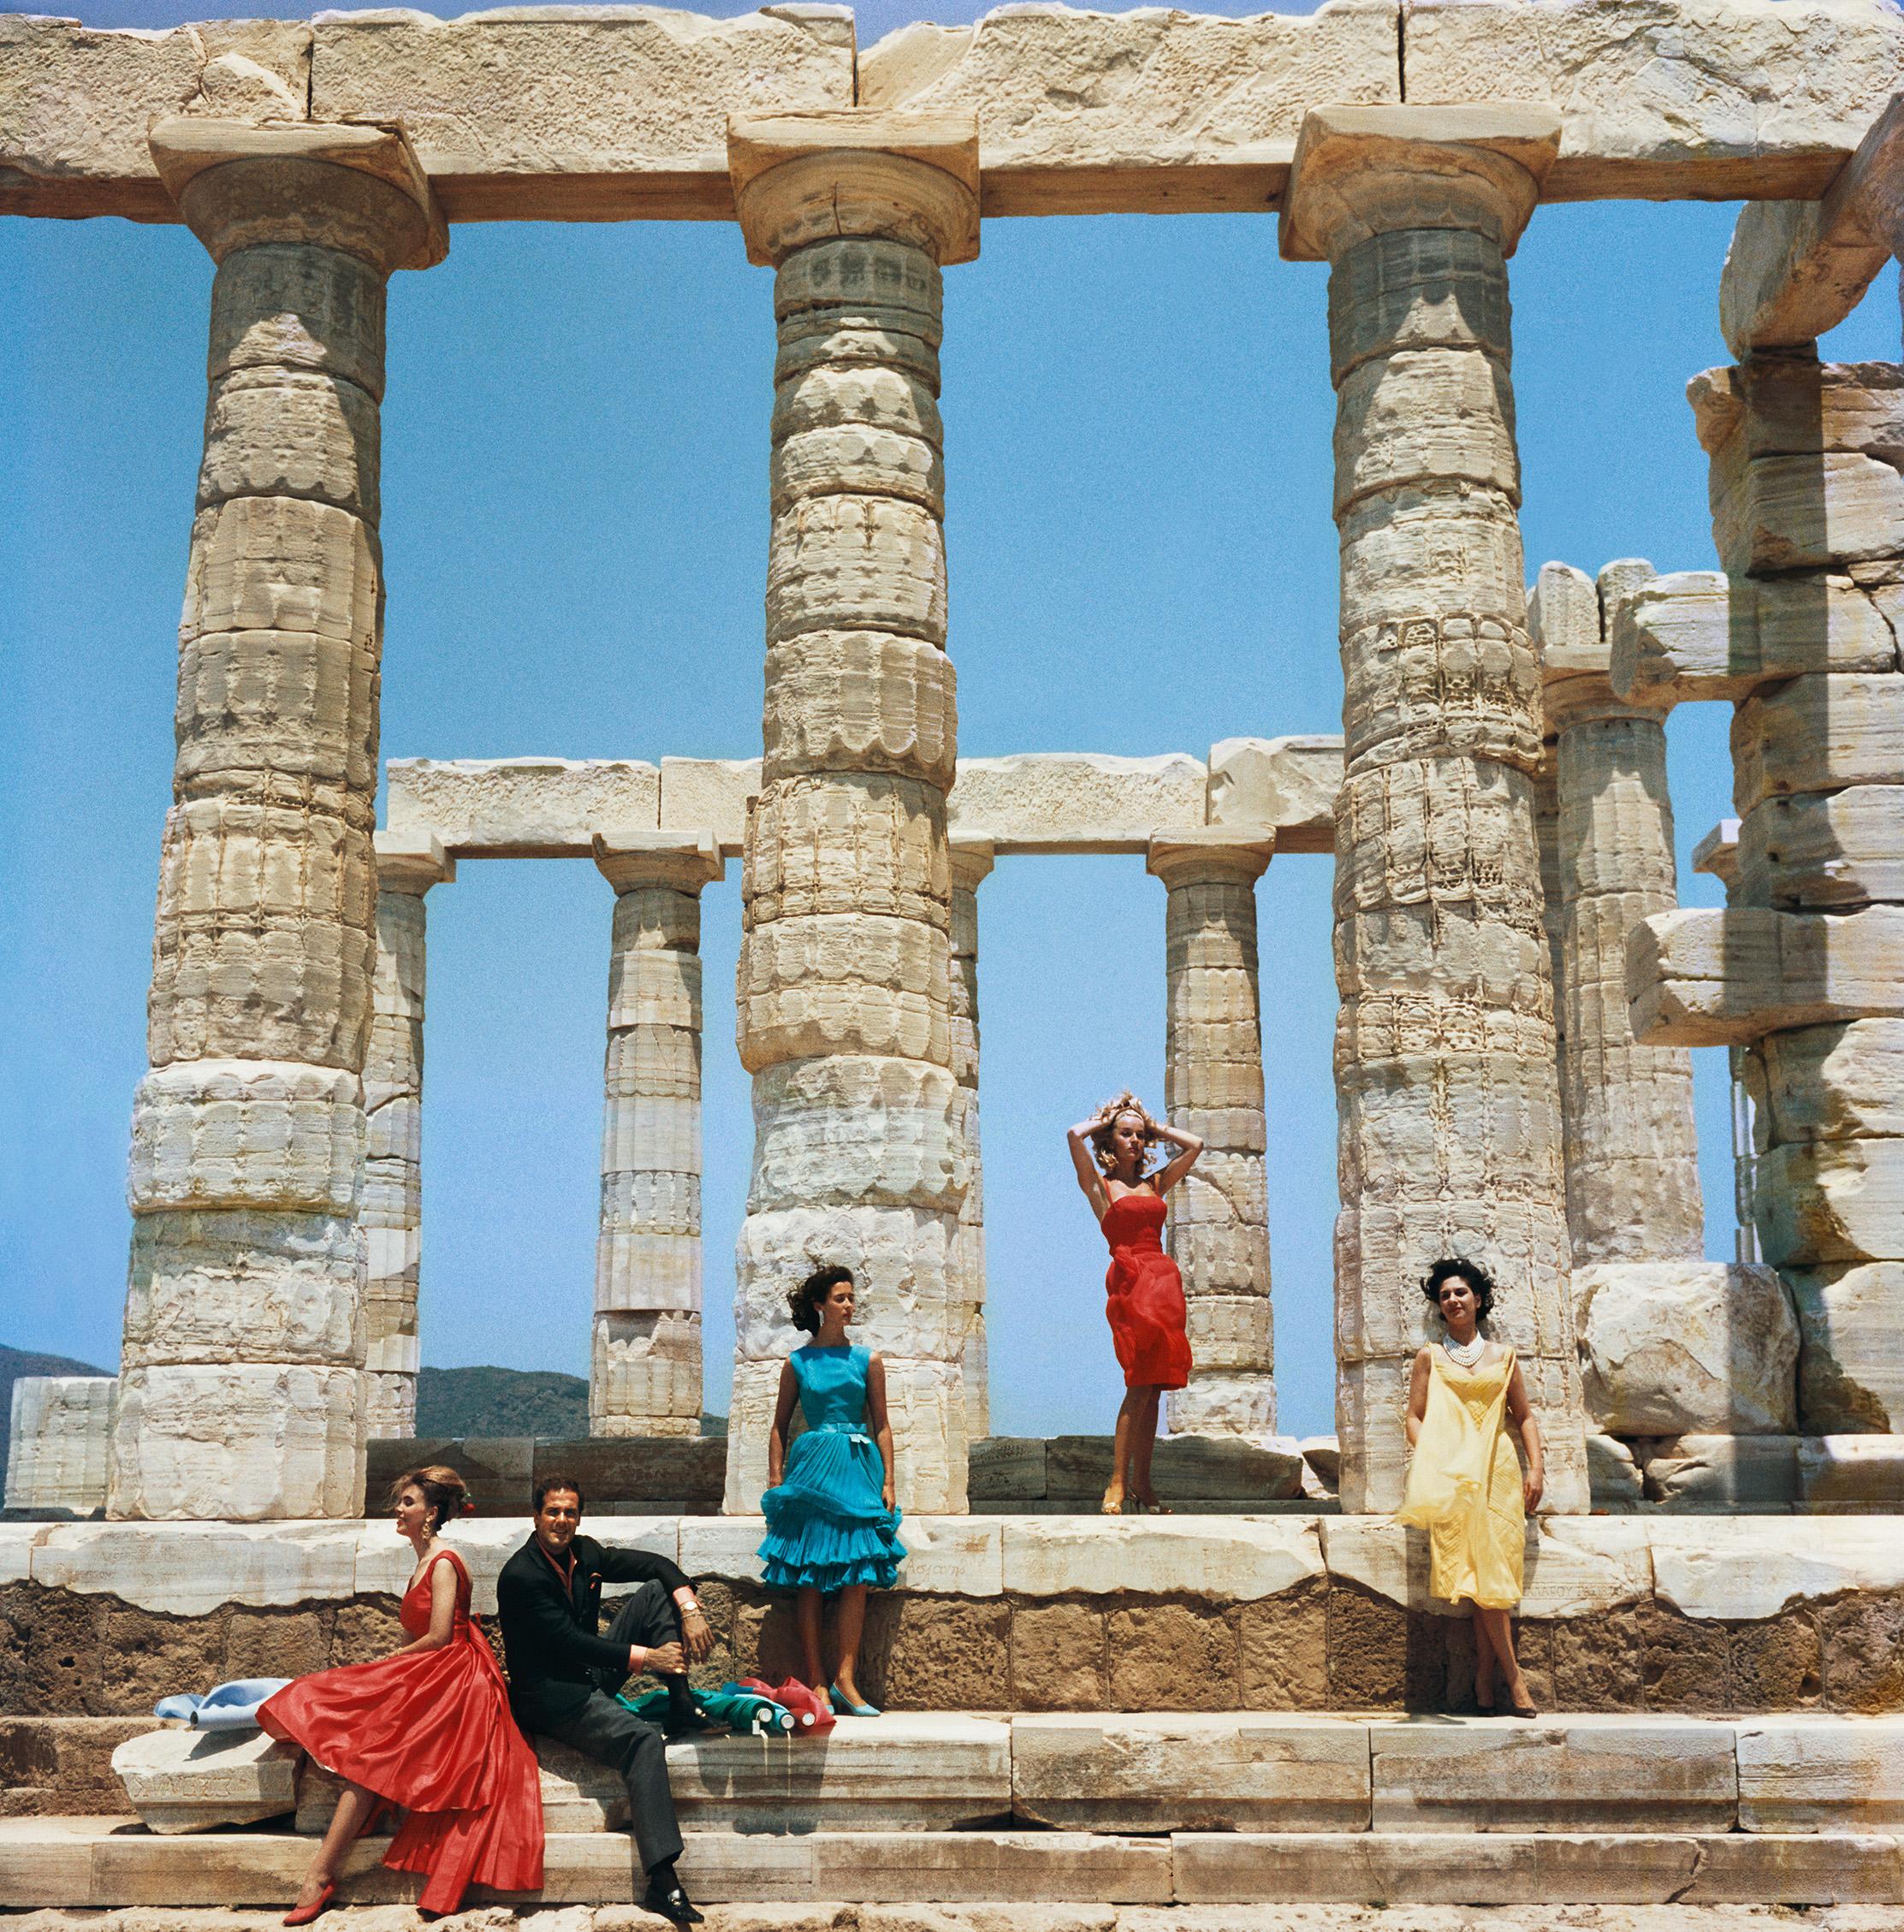 Slim Aarons
Dimitris Kritsas with Models at Sounio
1968
C print
Estate stamped and hand numbered edition of 150 with certificate of authenticity from the estate. 

Dimitris Kritsas, a fashionable young couturier, poses among the gleaming Doric